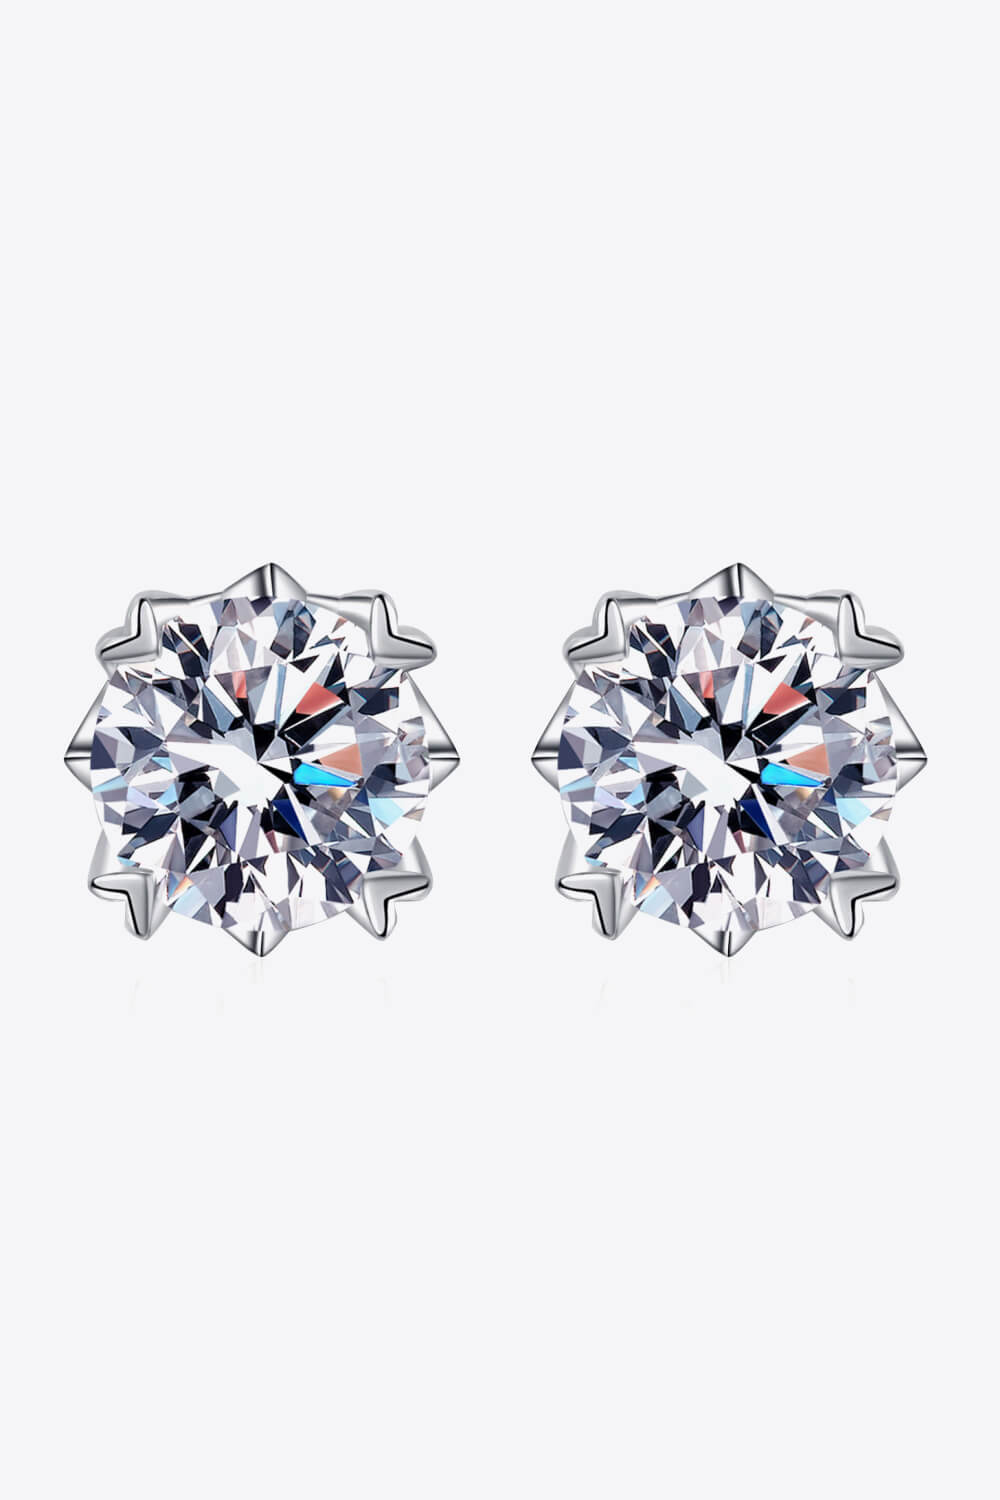 Sterling silver earrings, Lab-created gemstones, 4-carat statement studs, Sparkling centerpiece, Elegant stud design, Affordable luxury earrings, High-quality craftsmanship, Timeless beauty, Fine jewelry accessory, Moissanite stud earrings.